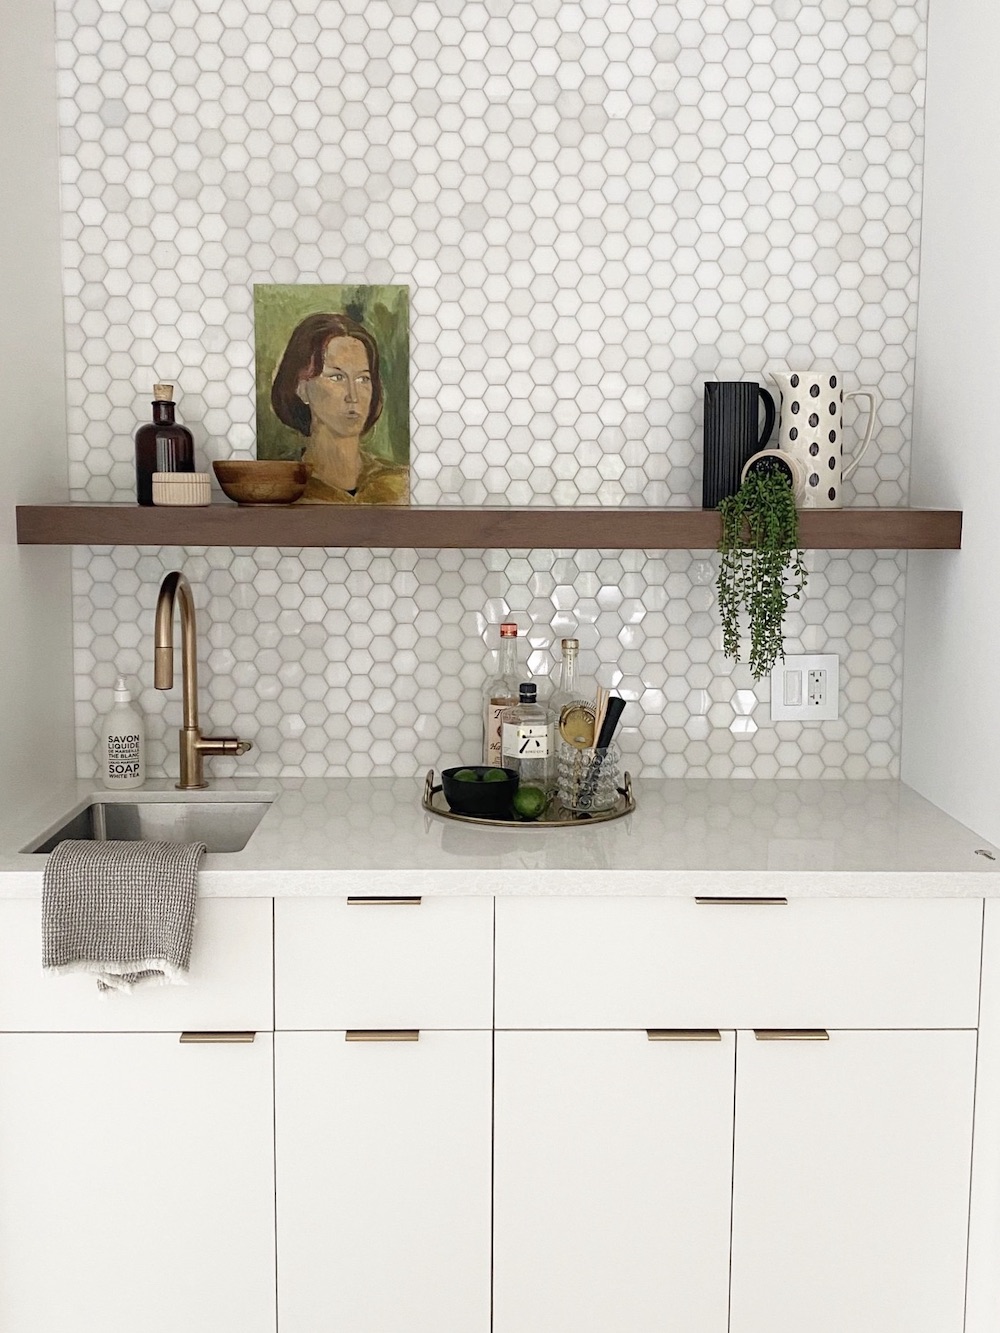 Small kitchen bar area designed and styled by The Property Stylist Inc. with white countertops, white hexagon tile backsplash, a wooden shelf, and brass accessories